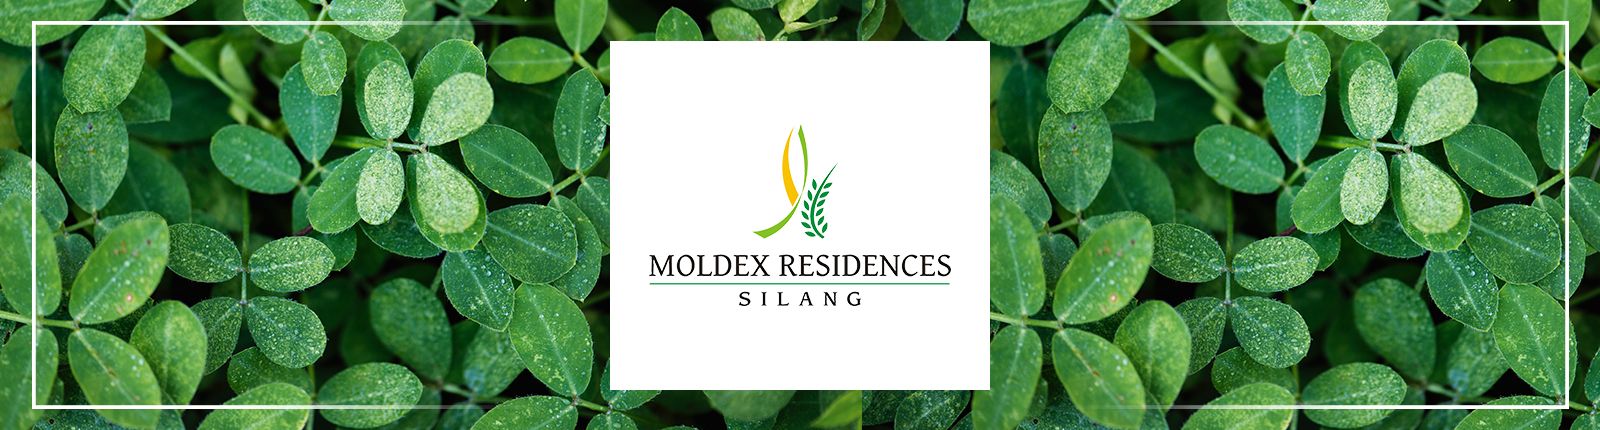 Moldex Residences Silang: A big potential for investment